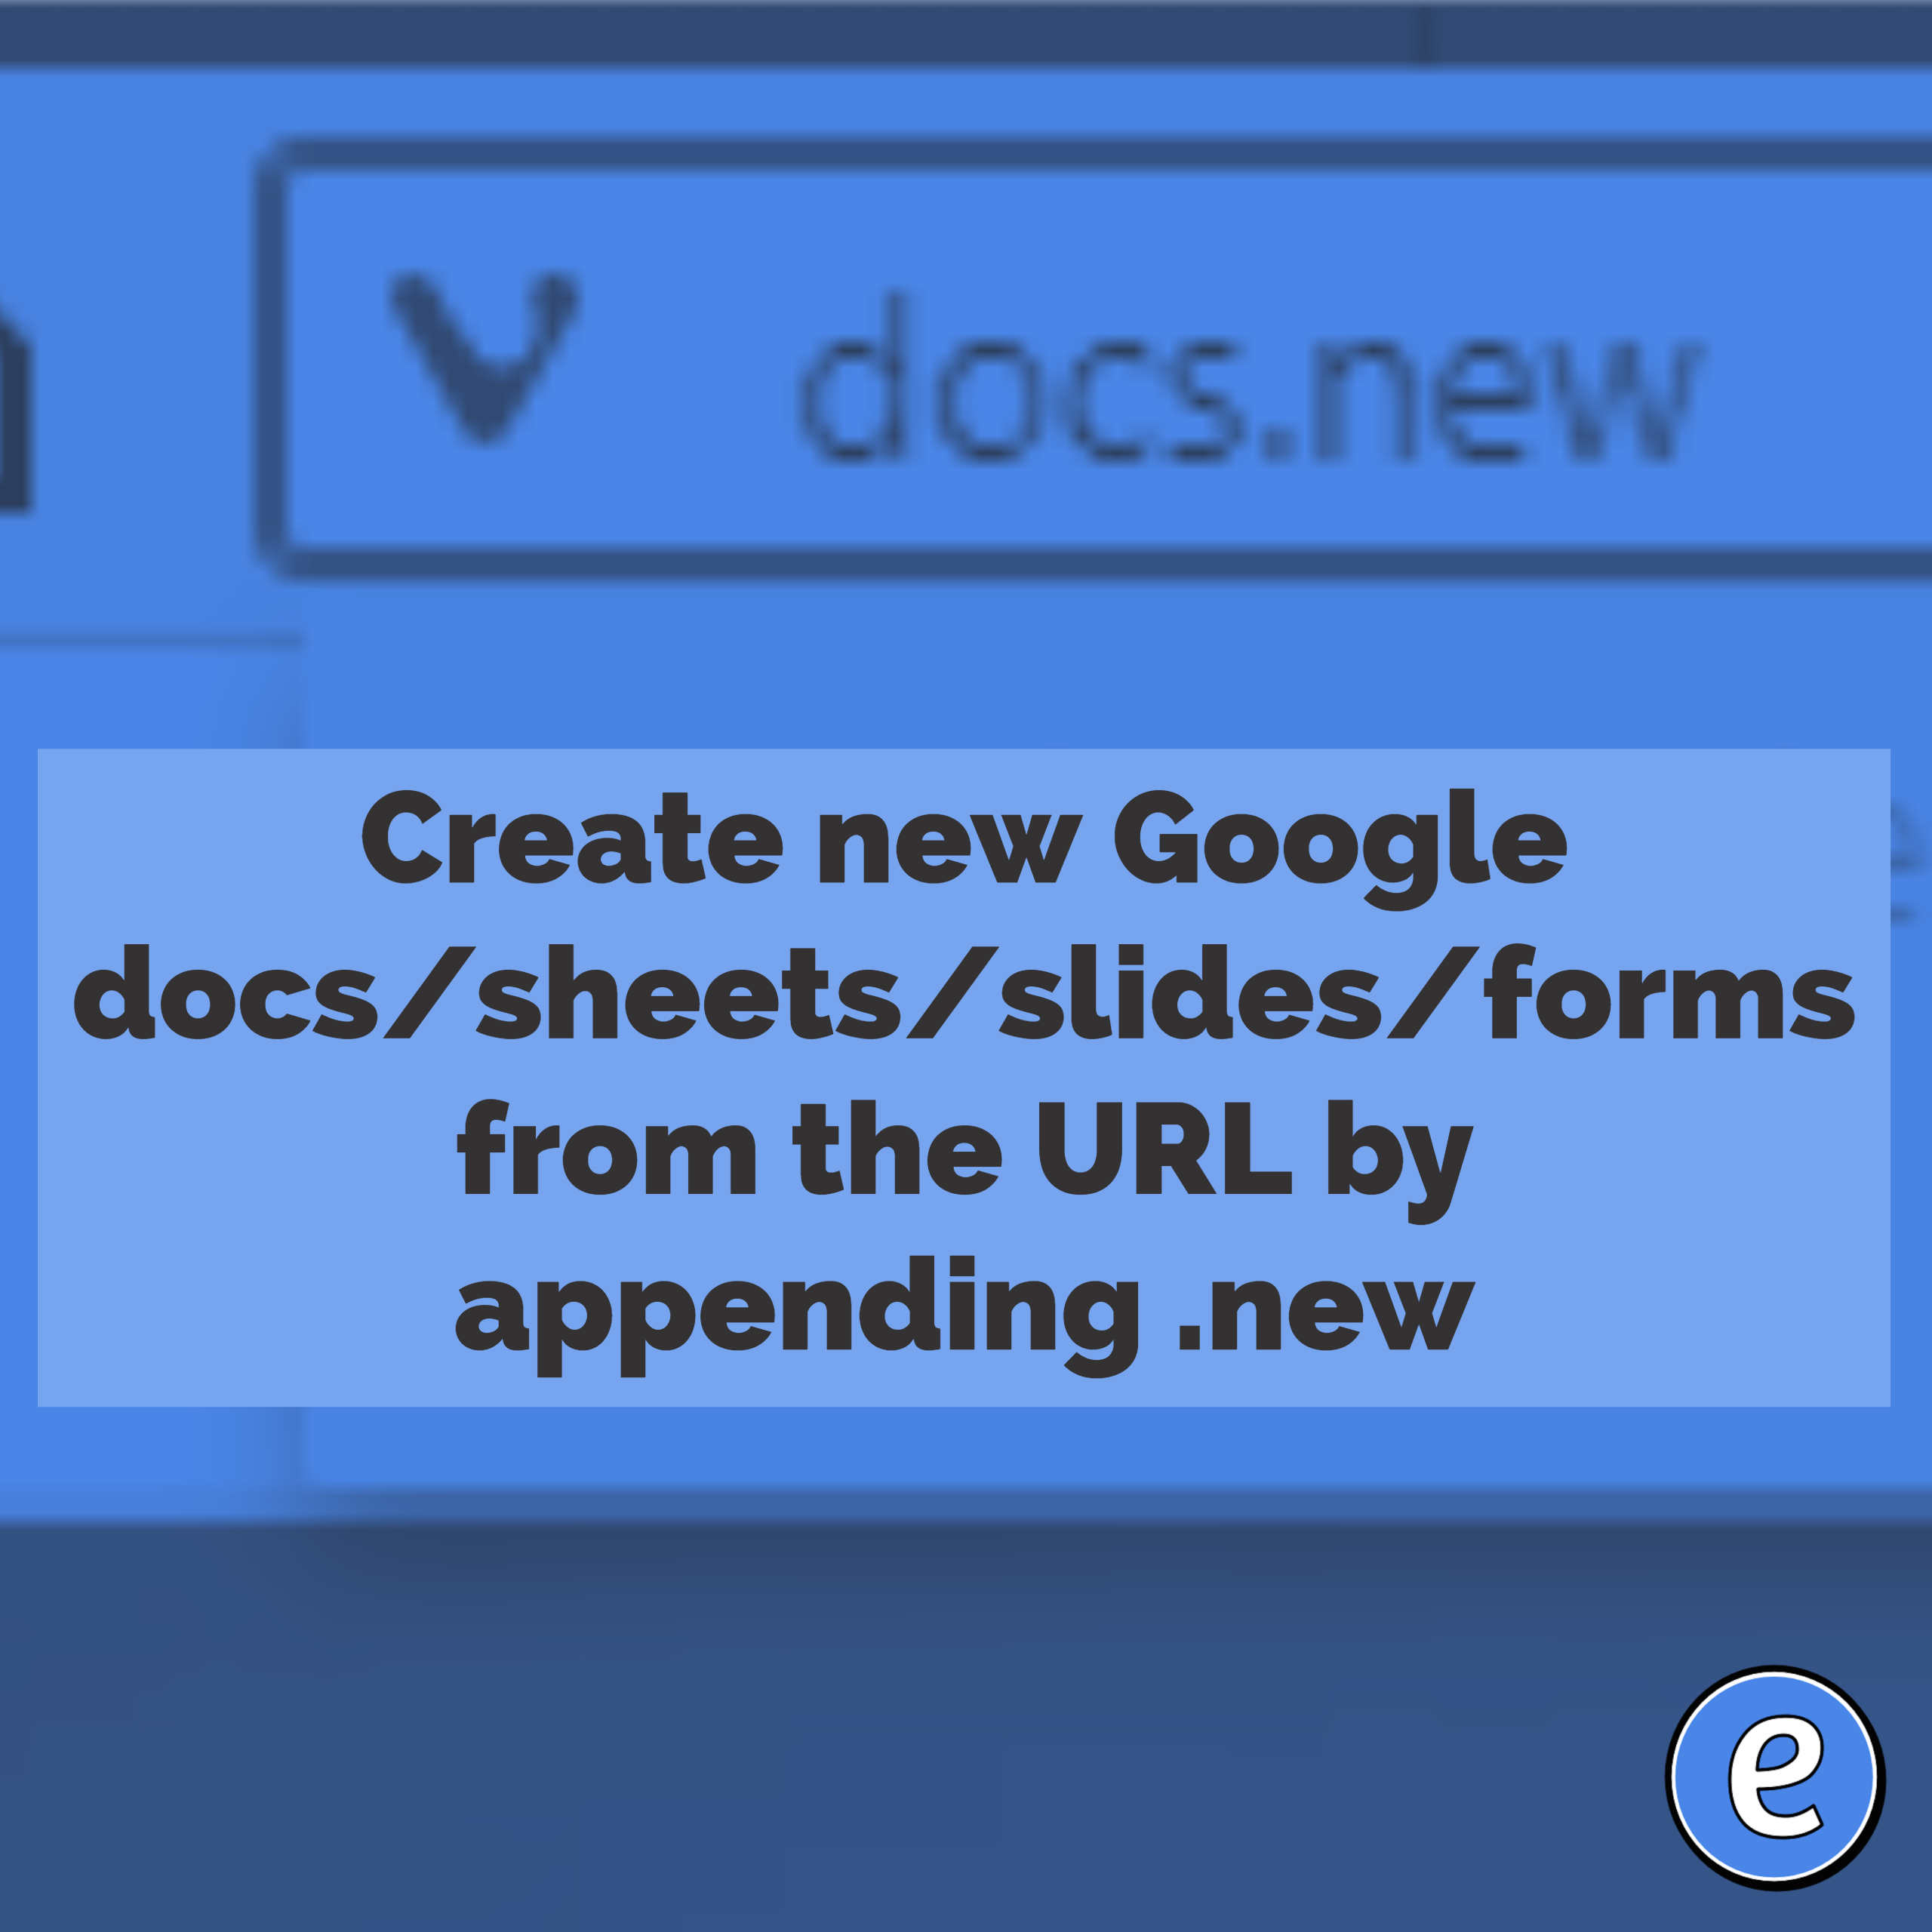 Create new Google docs/sheets/slides/forms from the URL by appending .new